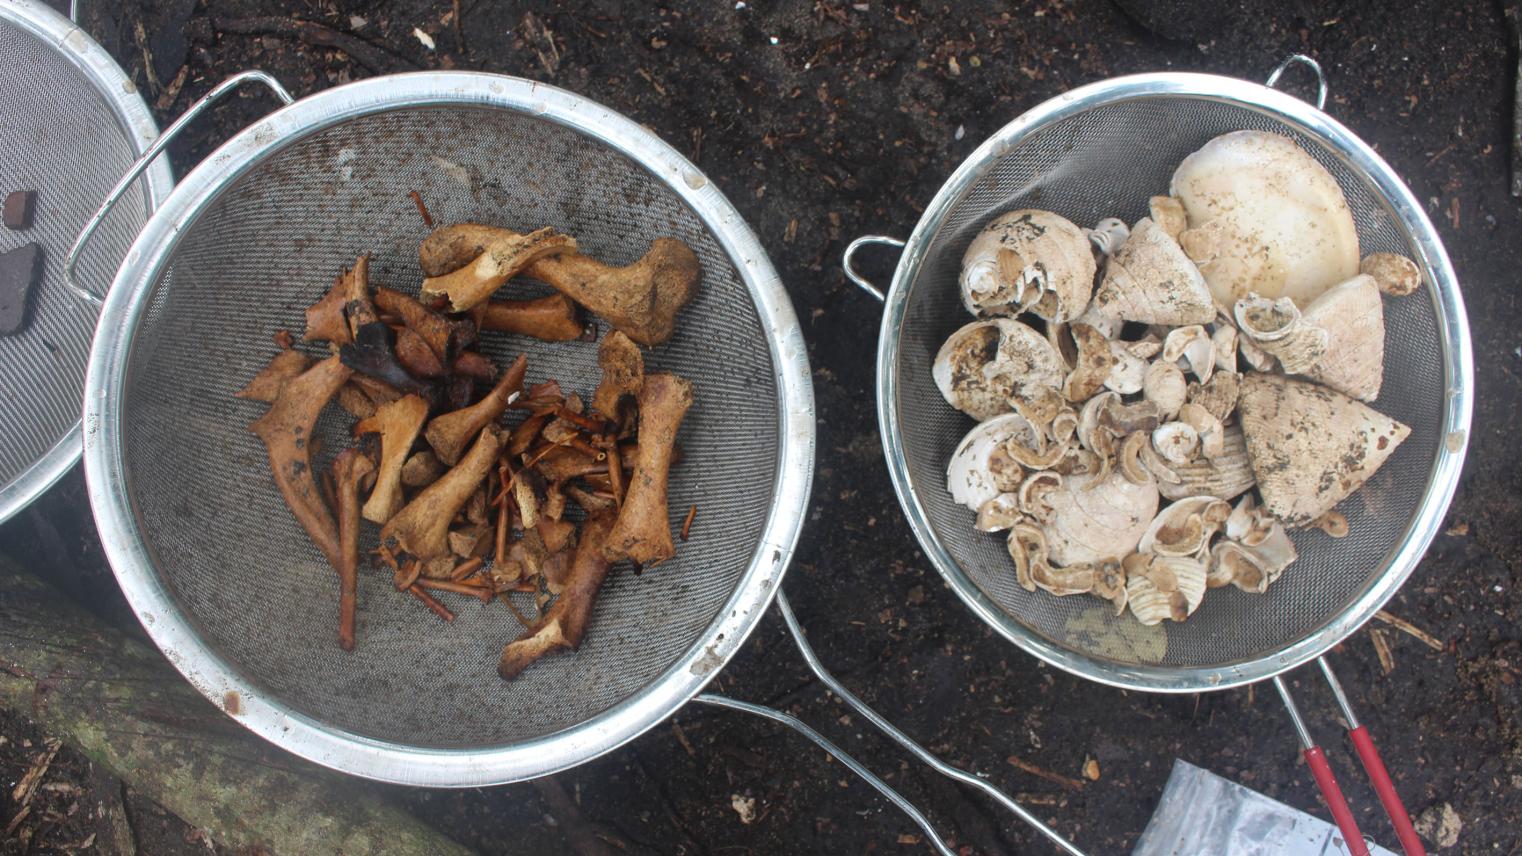 Bone and shellfish from the site. Extinct tortoise is seen in the sieve